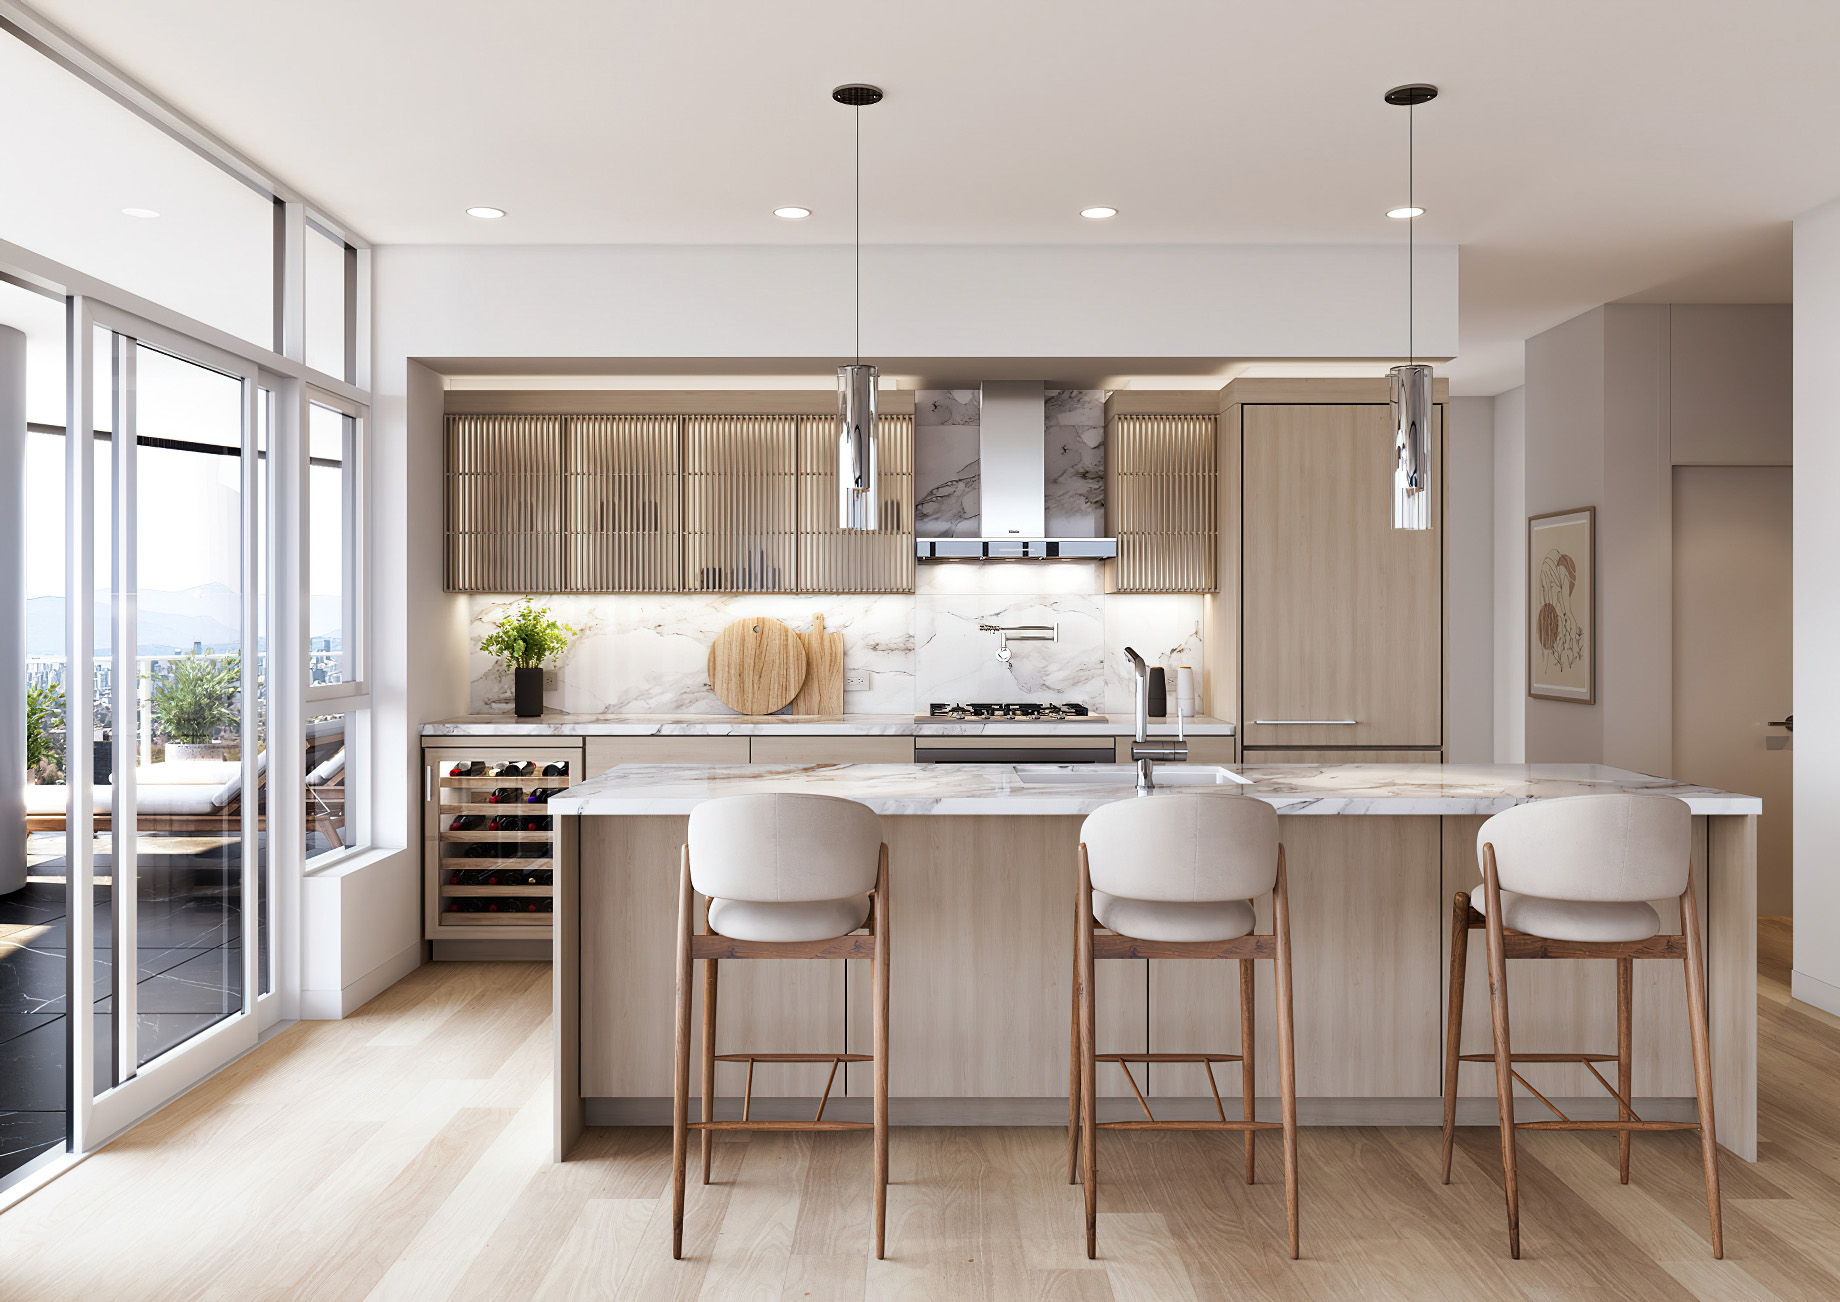 Luxurious Interiors - GREENHOUSE Brings Sophisticated Luxury Condo Living to Burnaby’s Metrotown